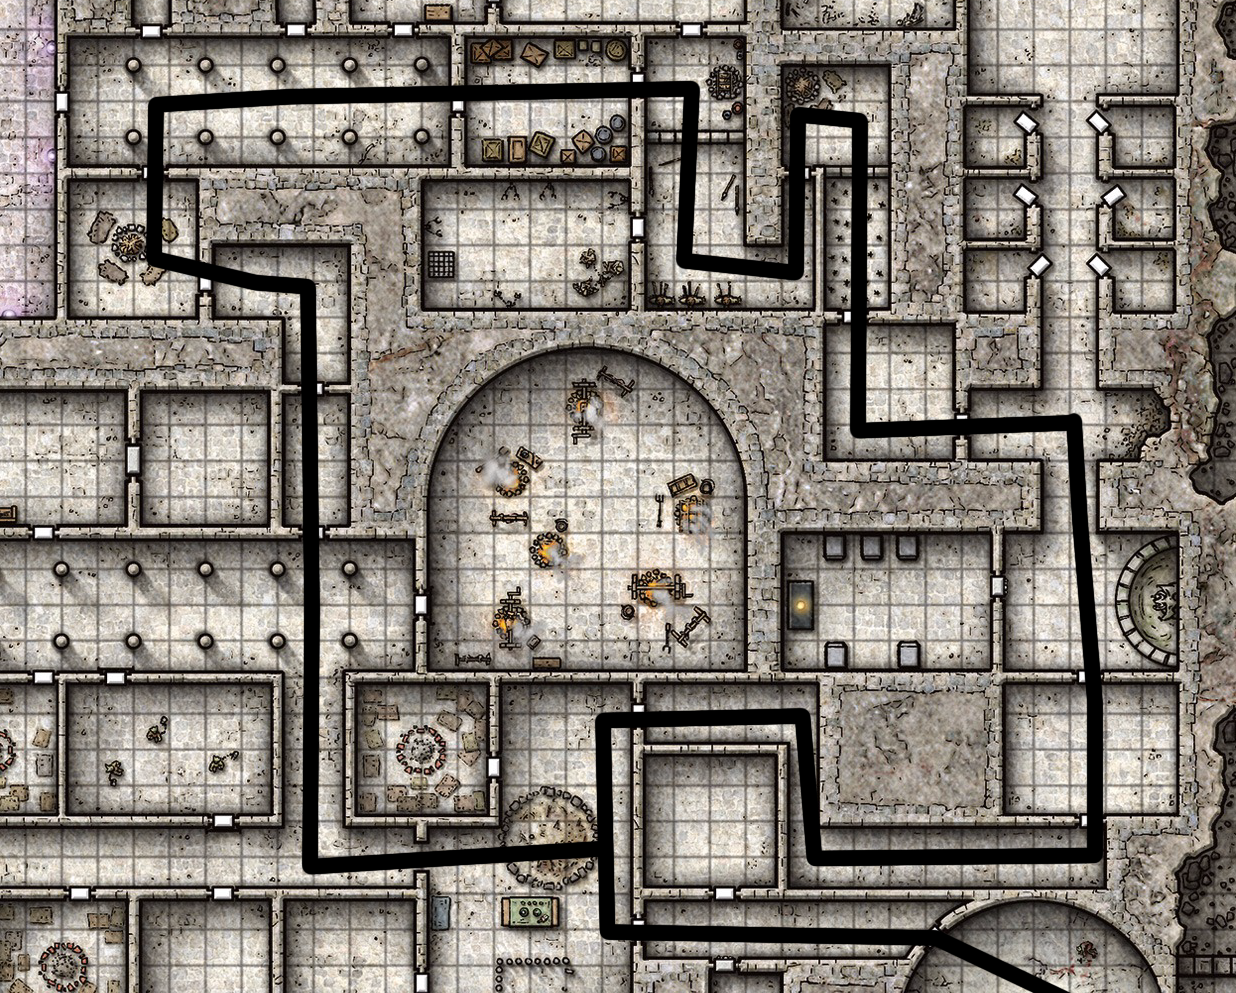 Sunless Citadel - Looping path on the first level of the dungeon